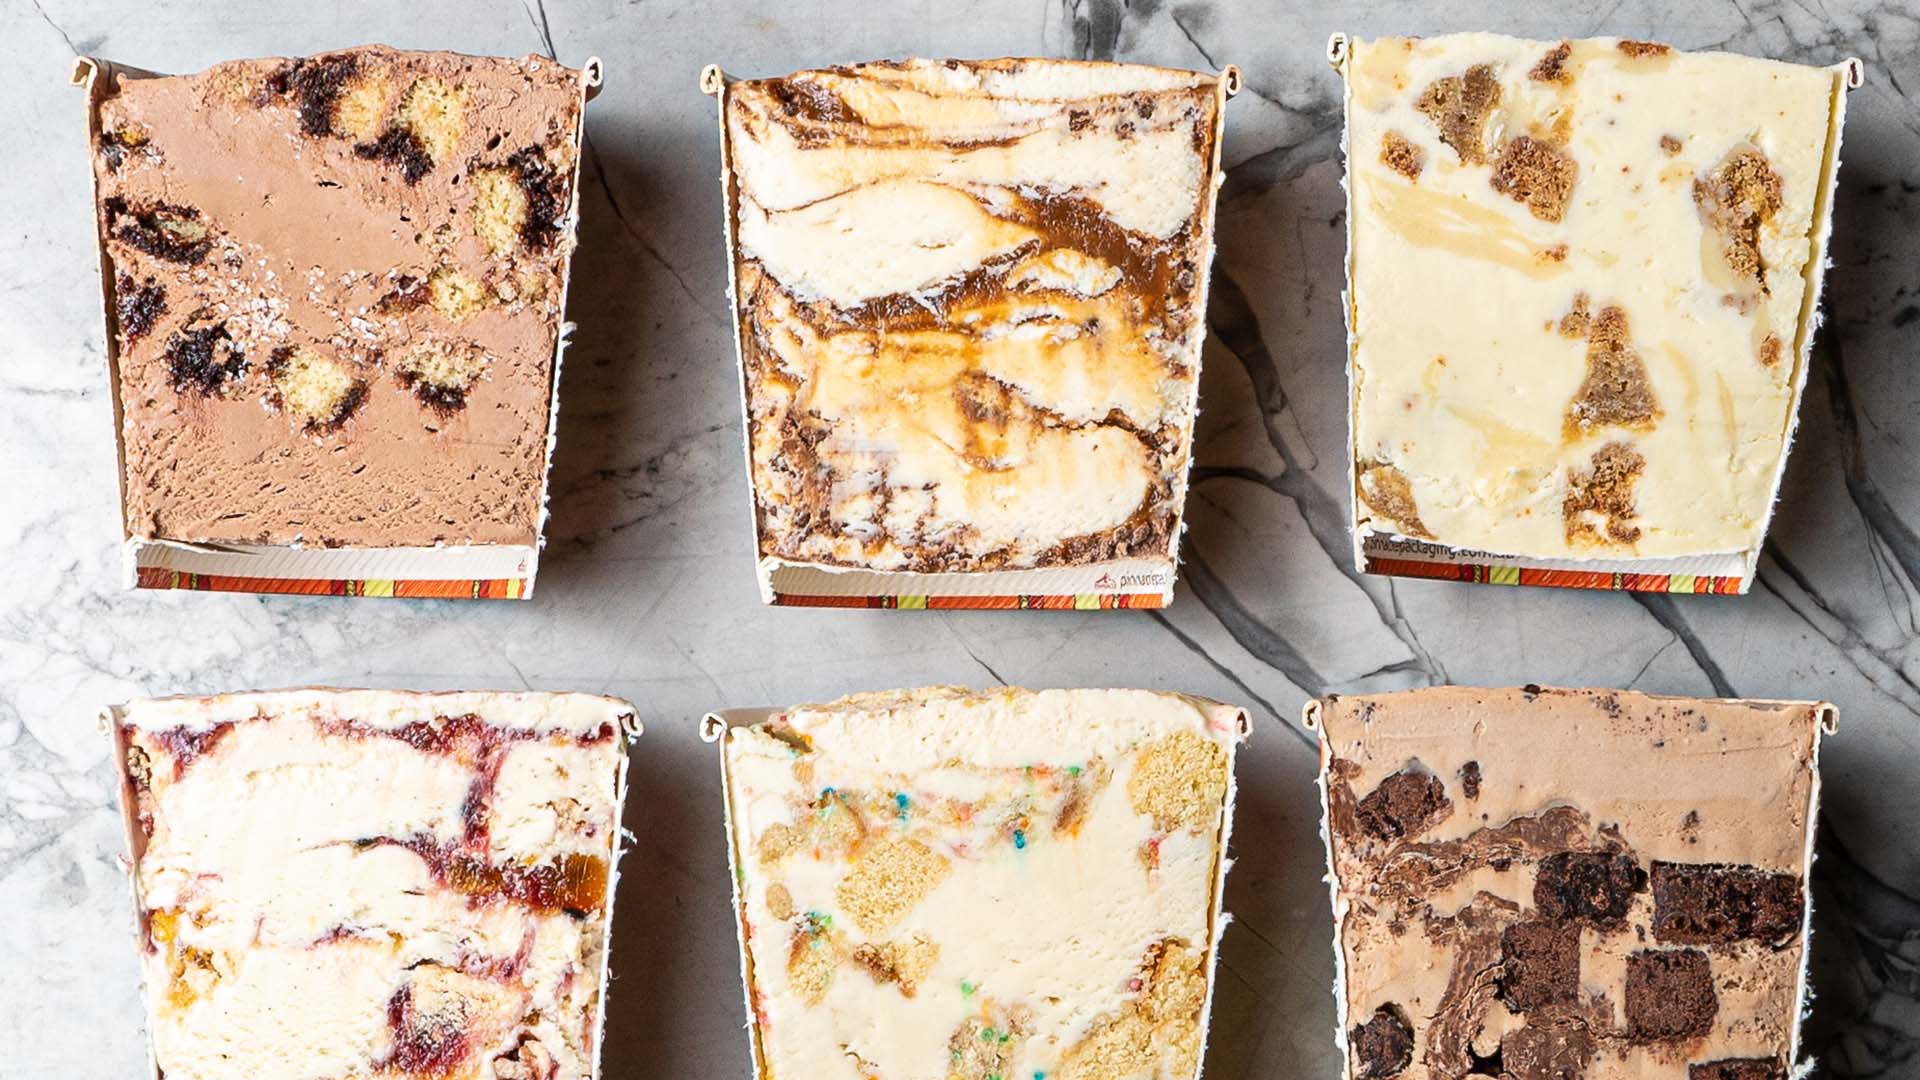 Clear Your Freezer: Messina Is Bringing Back 40 of Its Greatest Gelato Hits in Take-Home Tubs